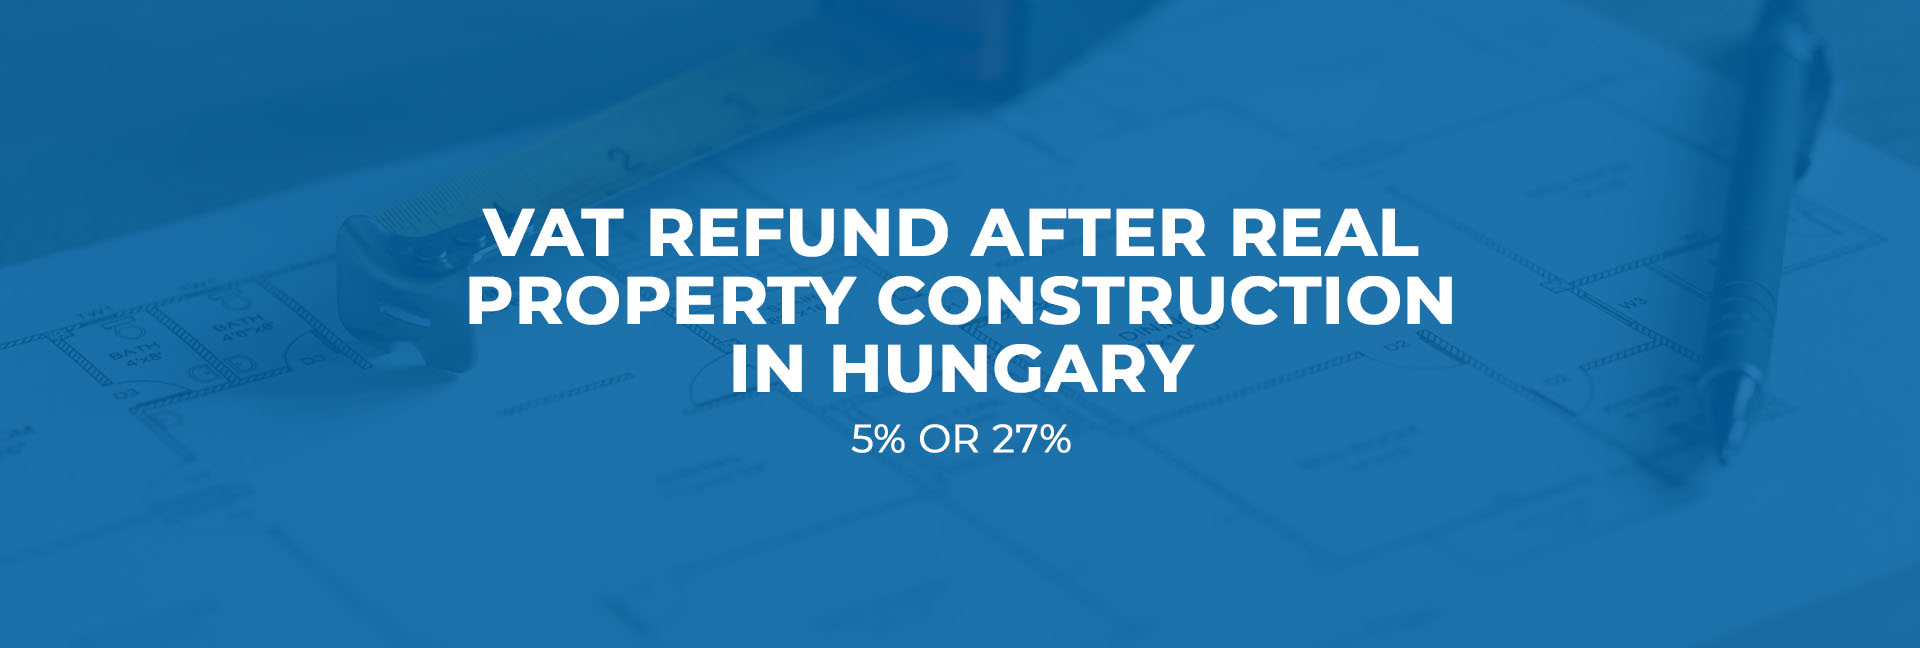 VAT refund after real property construction in Hungary (5% or 27%?)